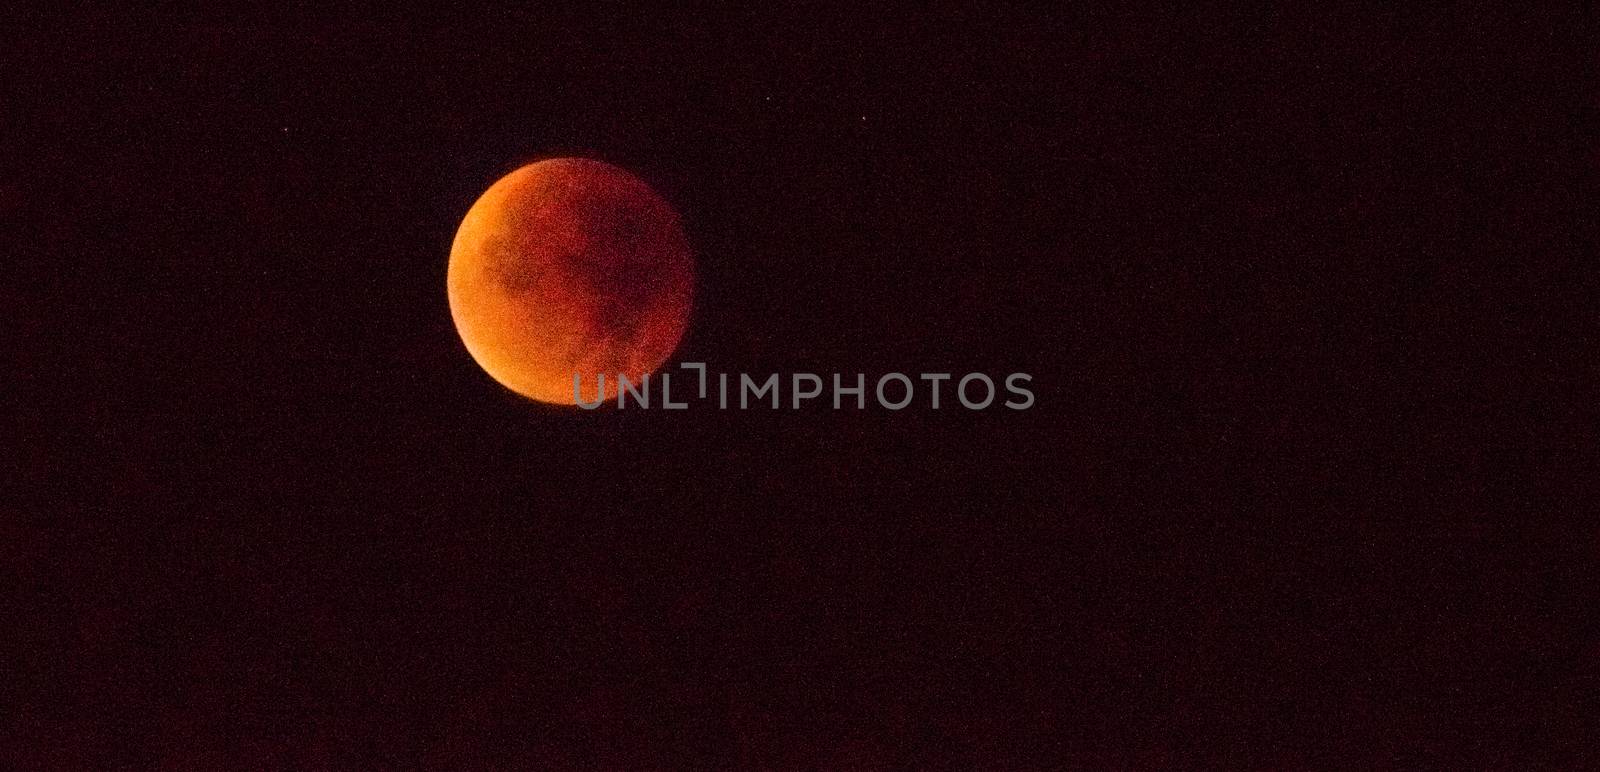 FRANCE, Douai : The supermoon rises on September 28, 2015 in Douai, northern France. This is a rare astronomical event when a swollen supermoon and lunar eclipse combined for the first time in decades, showing the satellite bathed in blood-red light.